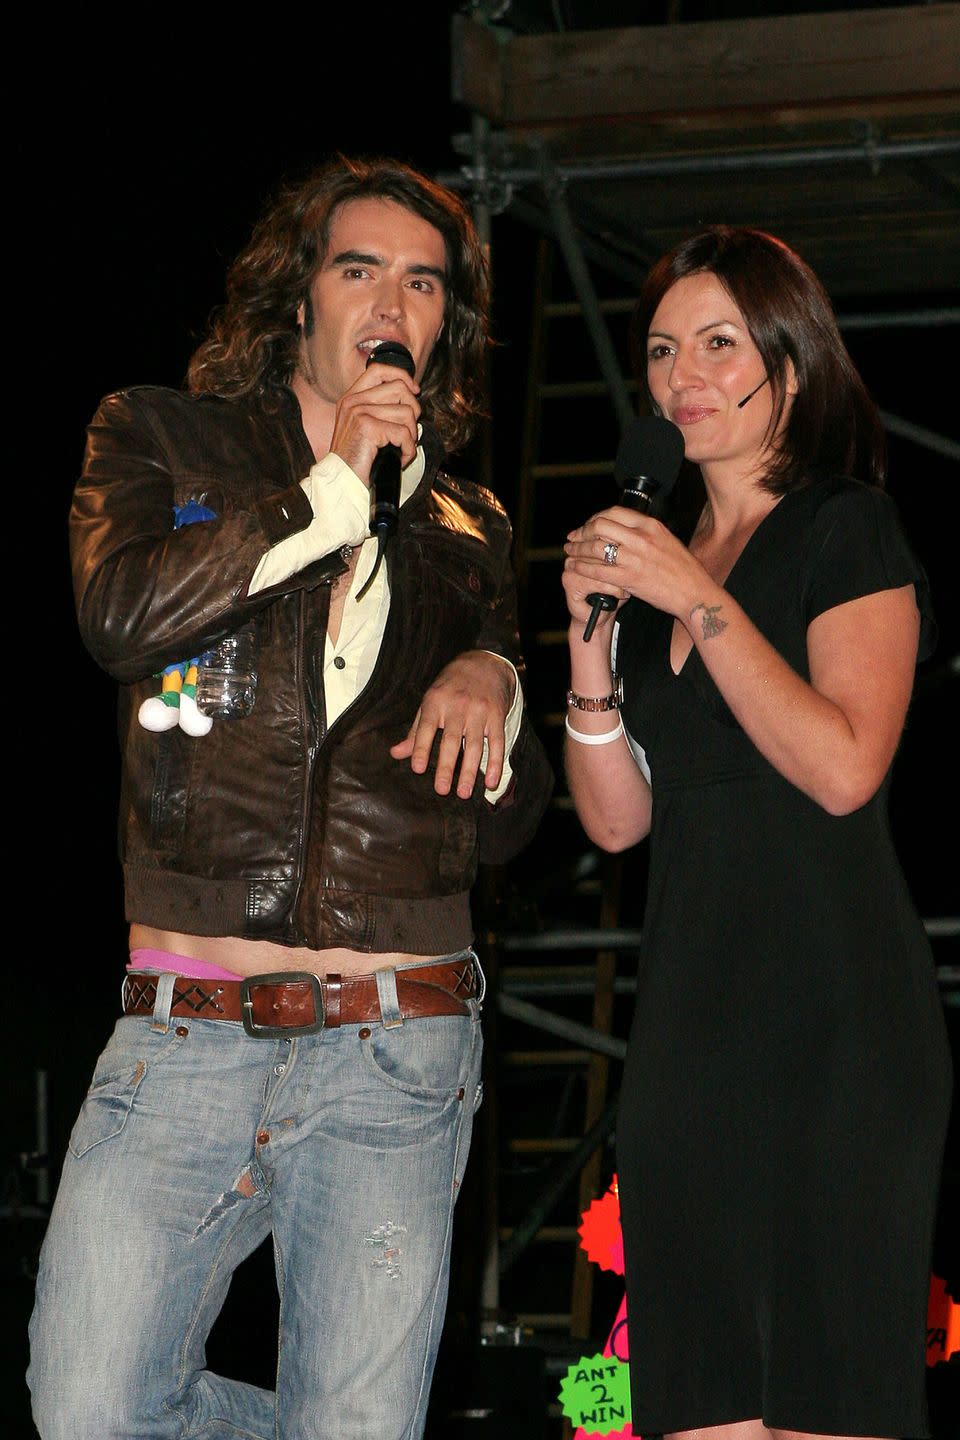 russell brand on stage with big brother host, davina mccall, at a live eviction in 2005